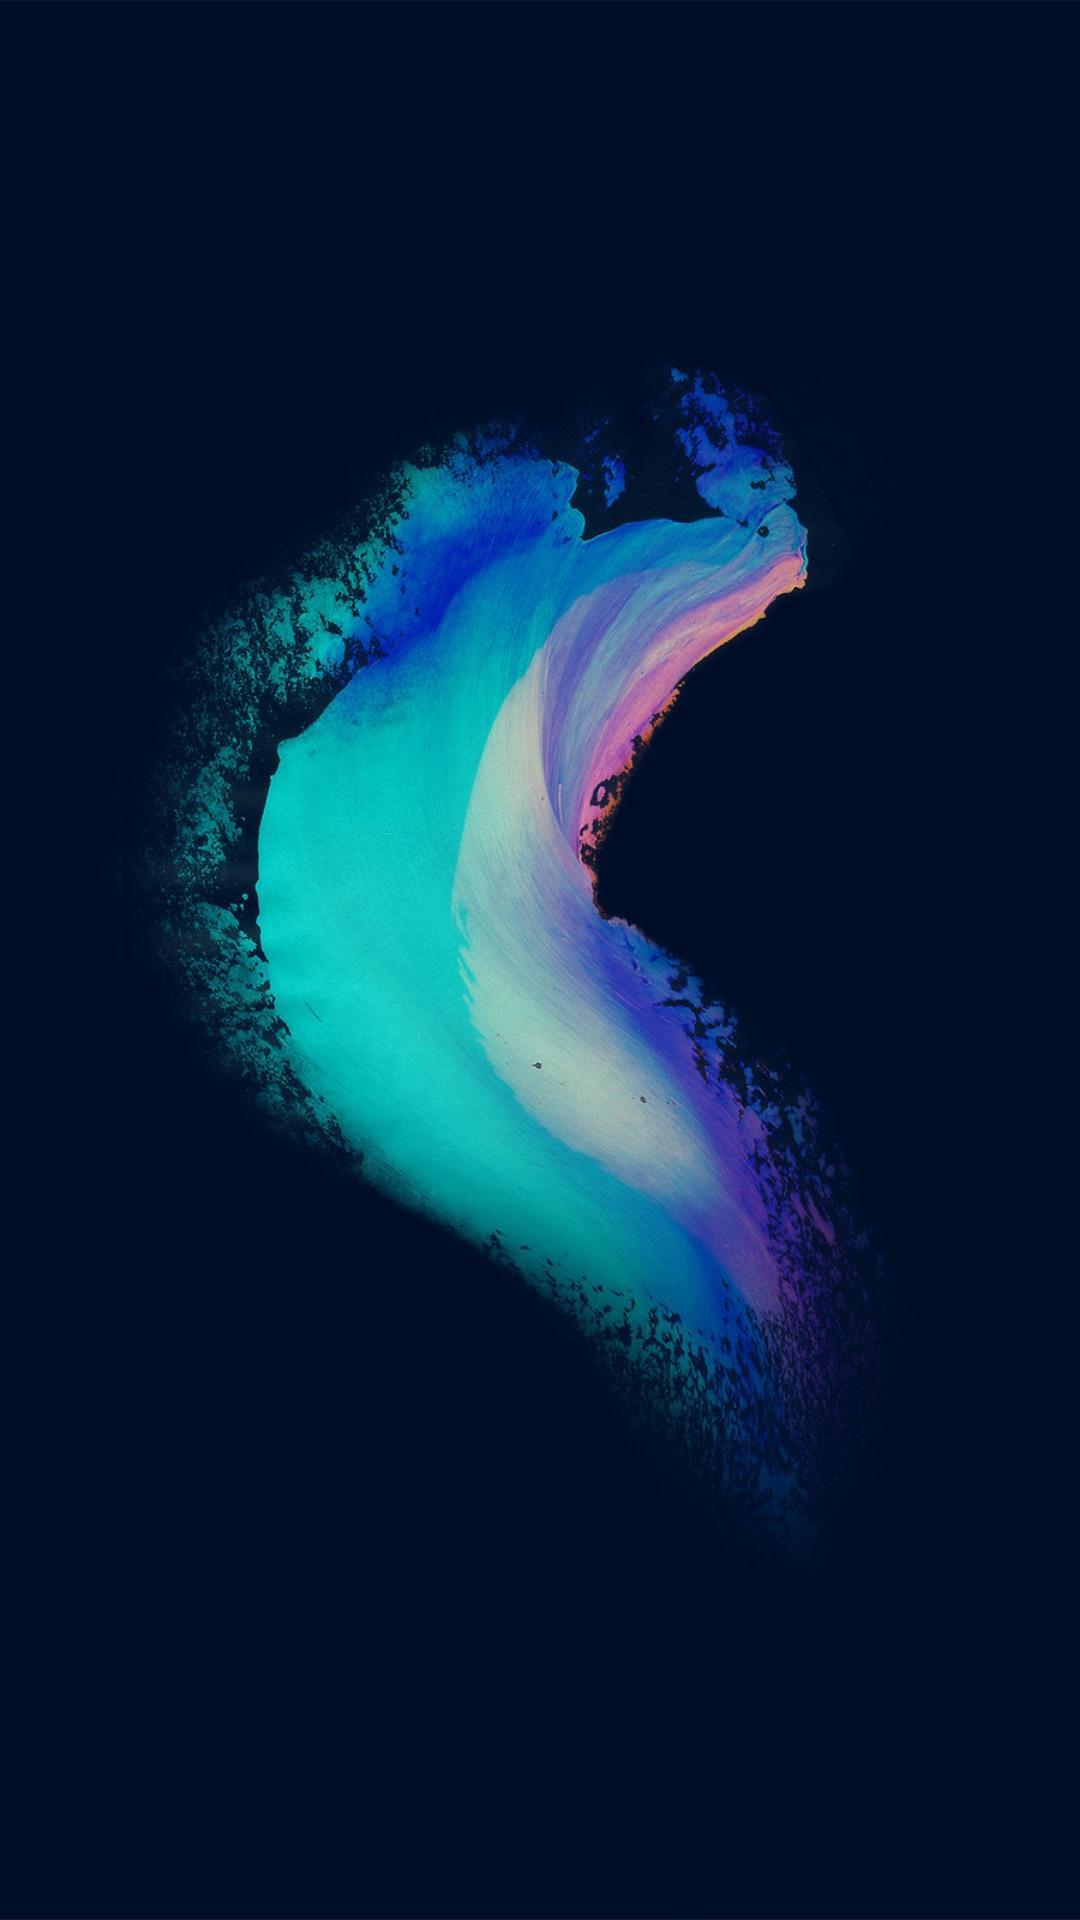 Question Anyone have an HD, OLED version of this wallpaper? Tried